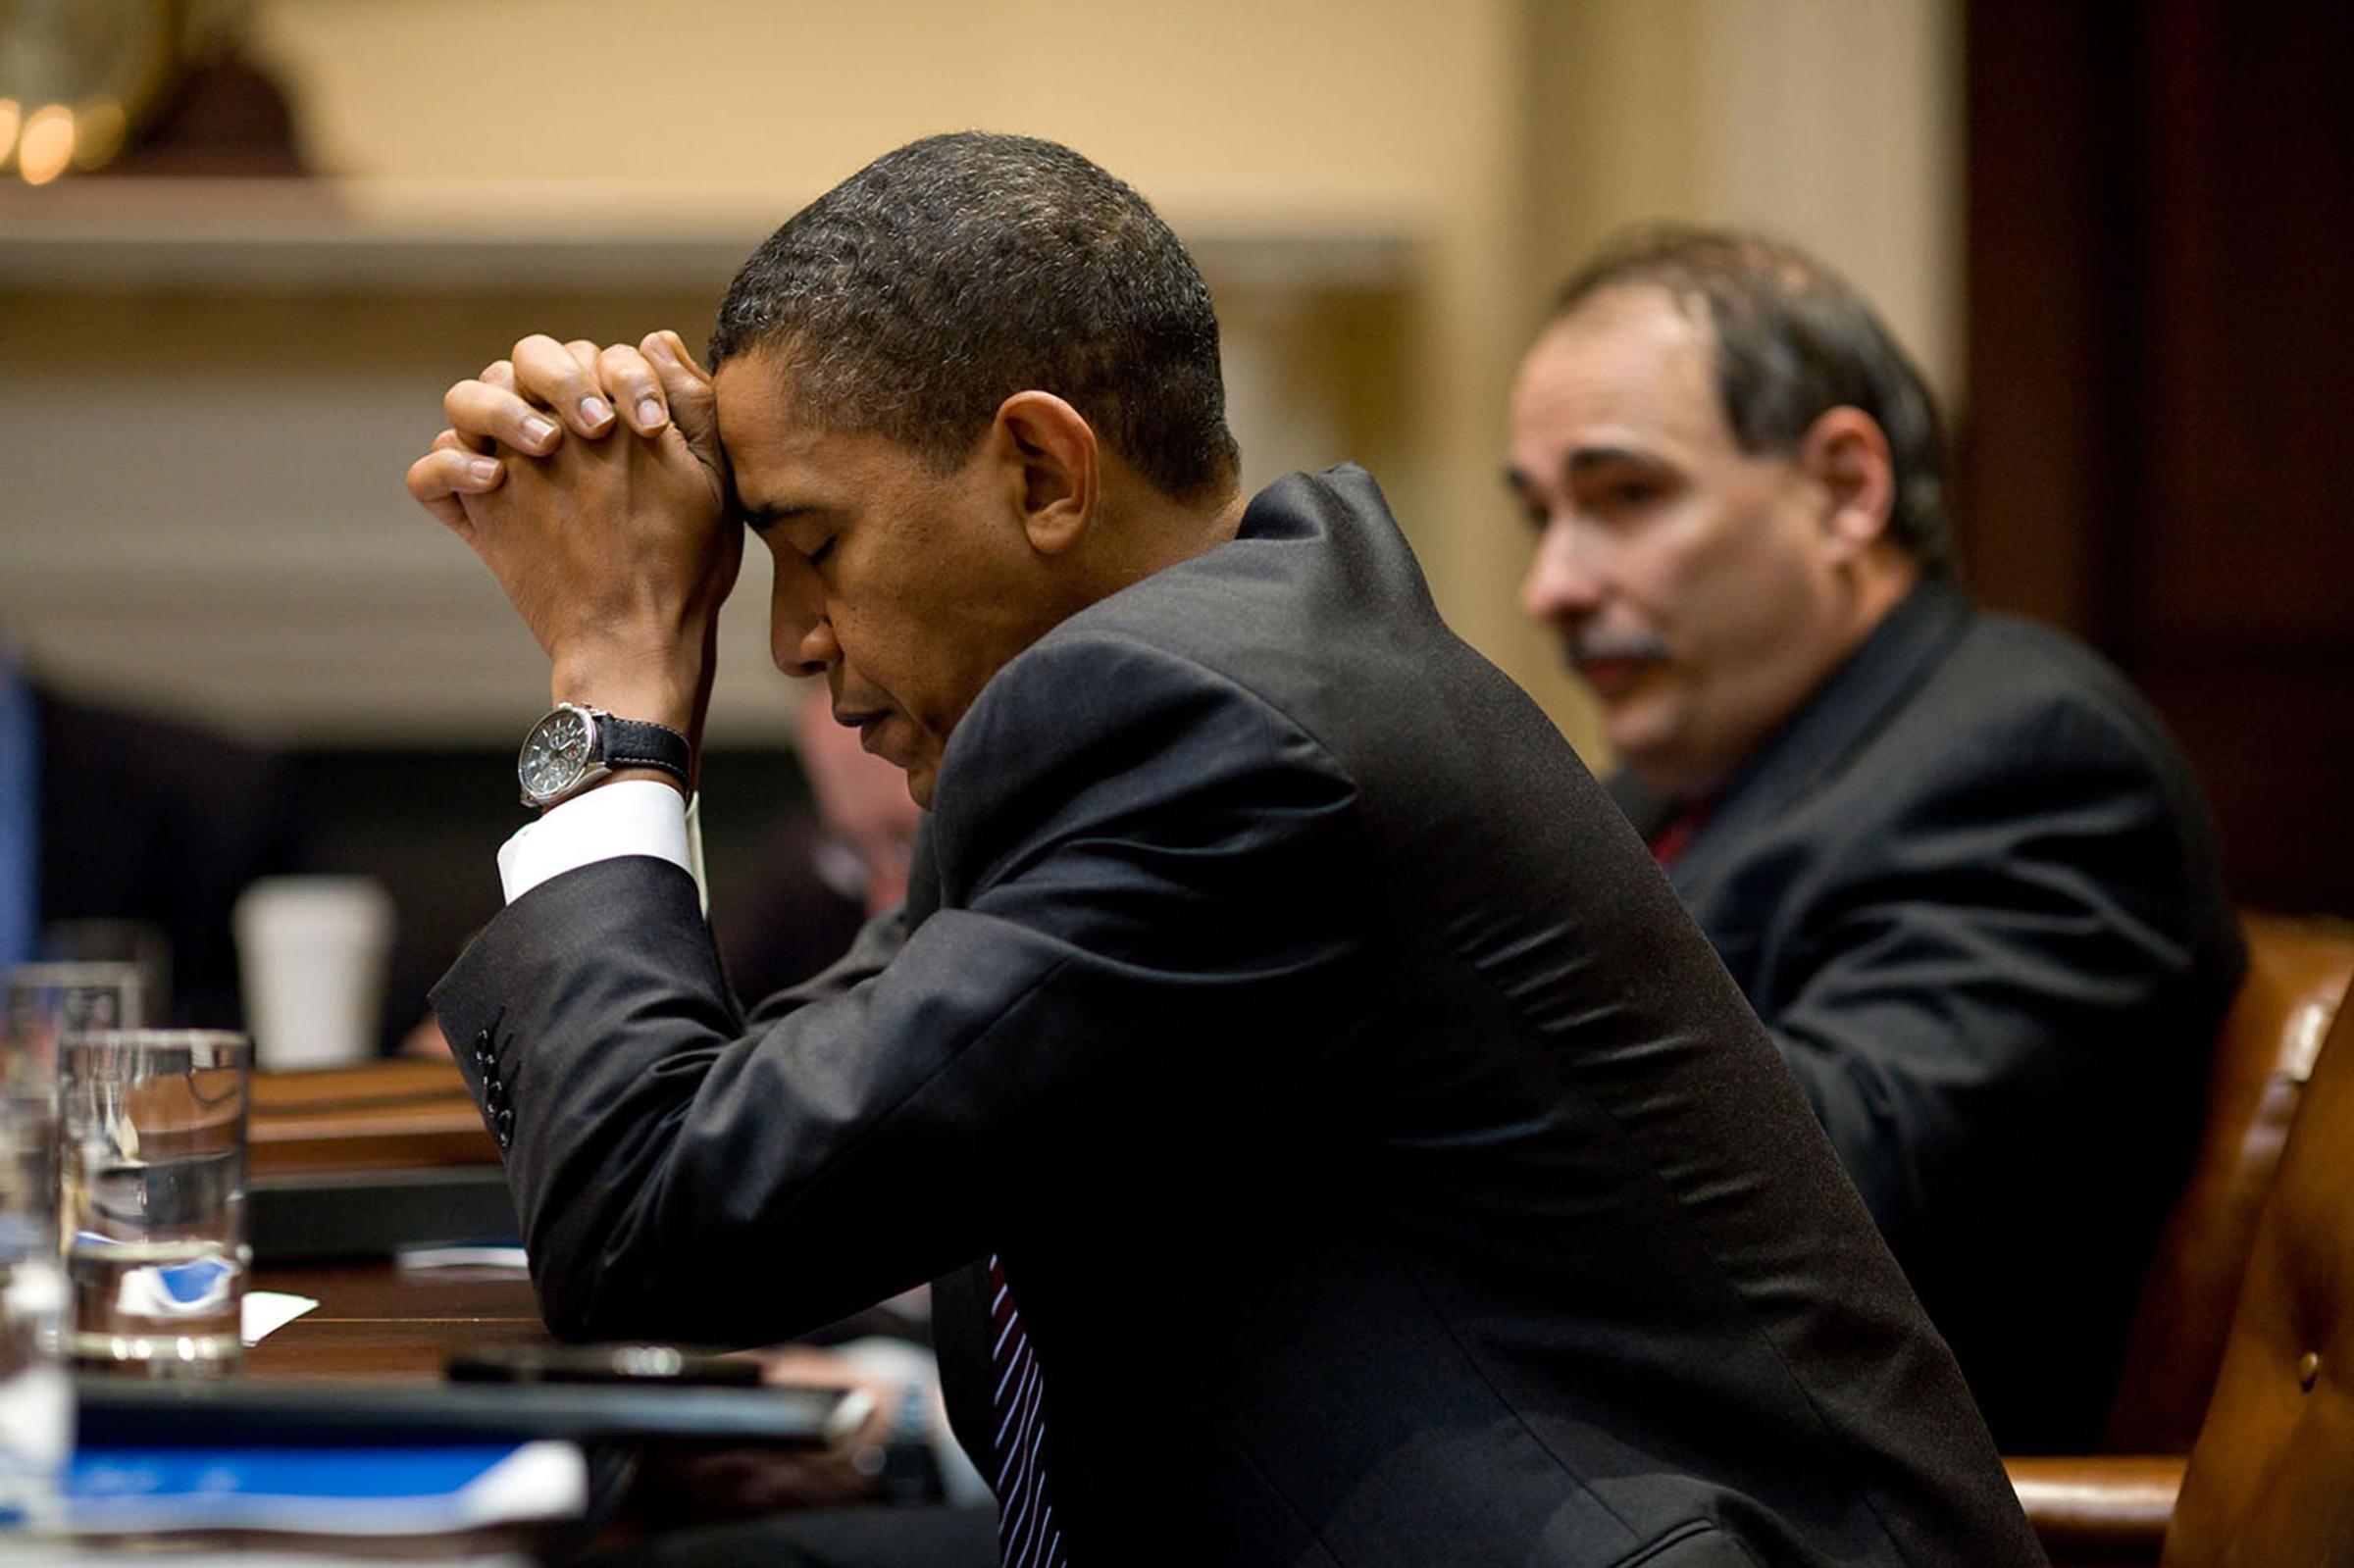 “The President appears in deep thought as he and senior advisor David Axelrod listen during a climate change meeting in the Roosevelt Room of the White House. A moment later, he was laughing at a humorous exchange,”Oct. 14, 2009.